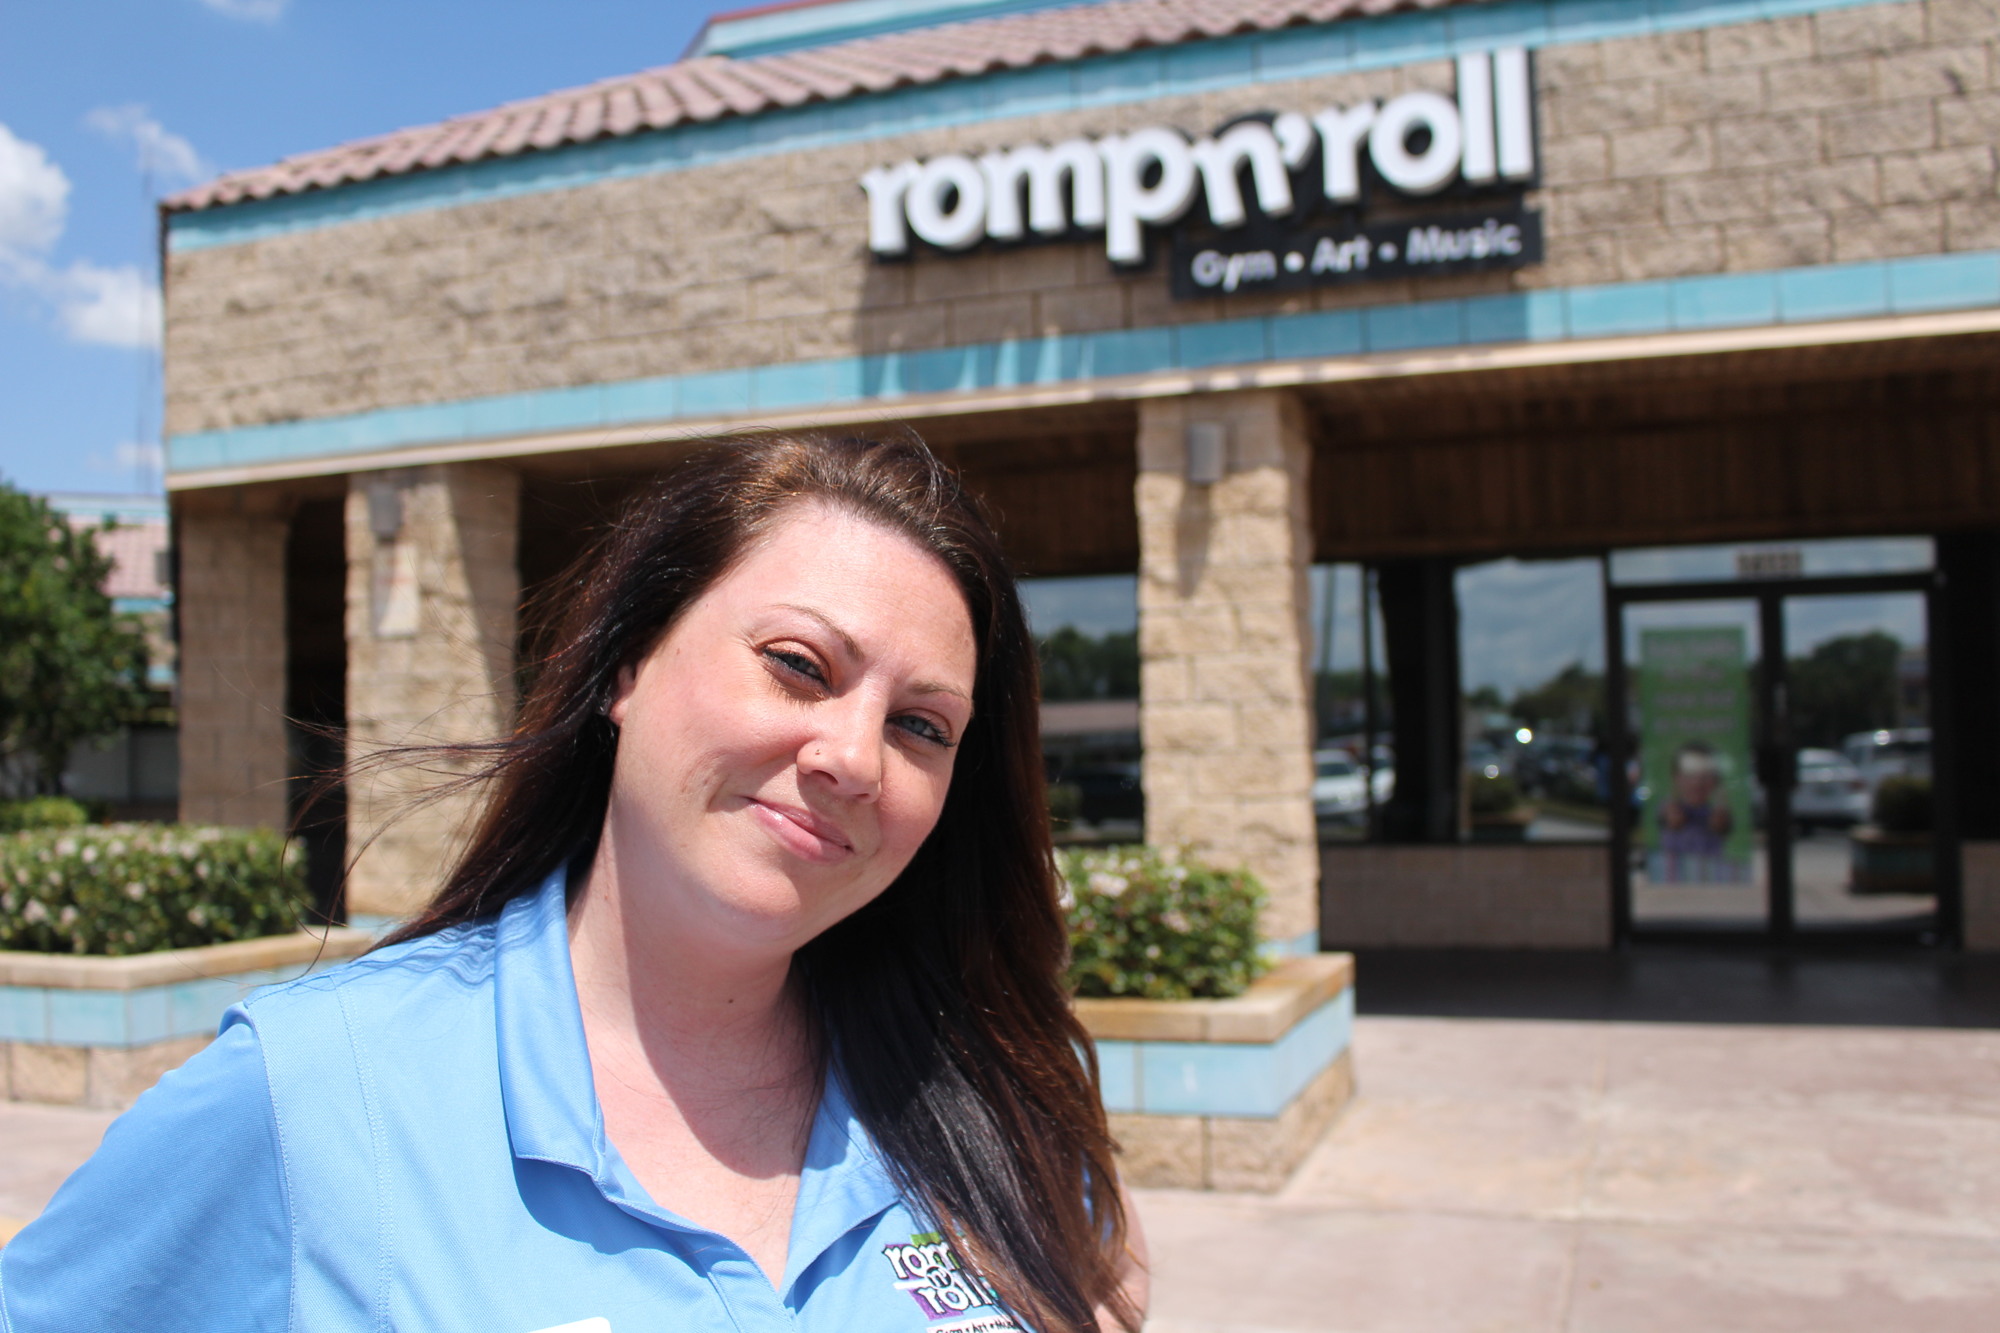 After a year and three months of searching for an occupation that allowed her to have more time with her son, Romp n’Roll owner Marie Simmons opened up her own business located in Winter Garden.